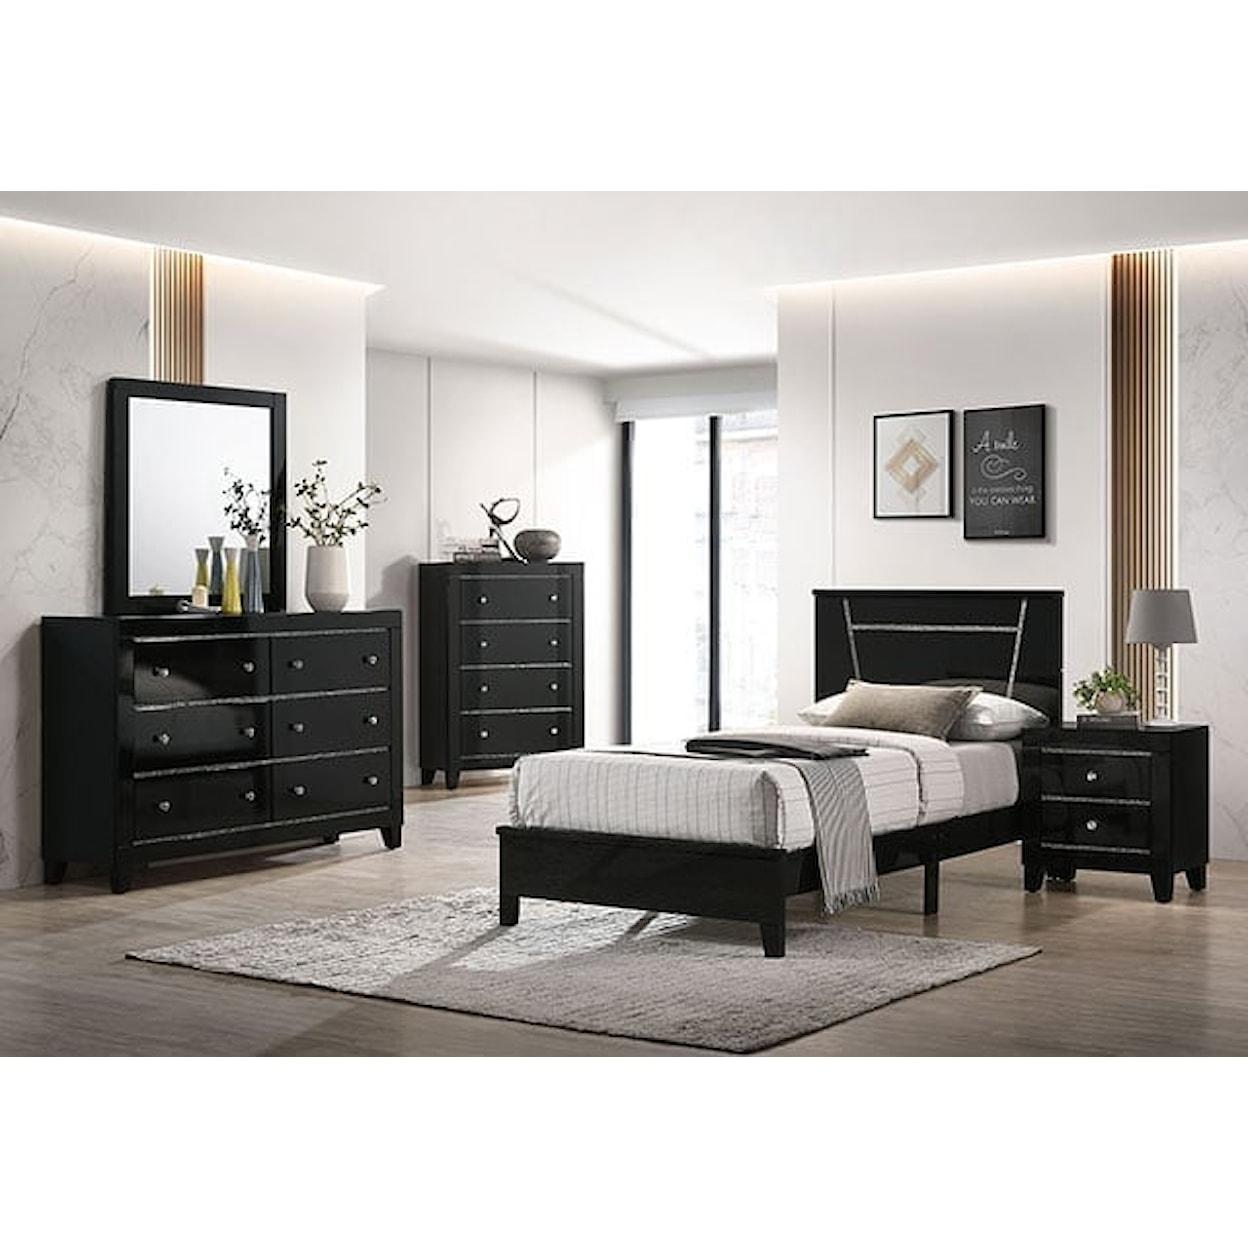 Furniture of America Magdeburg Twin Youth Bedroom Group